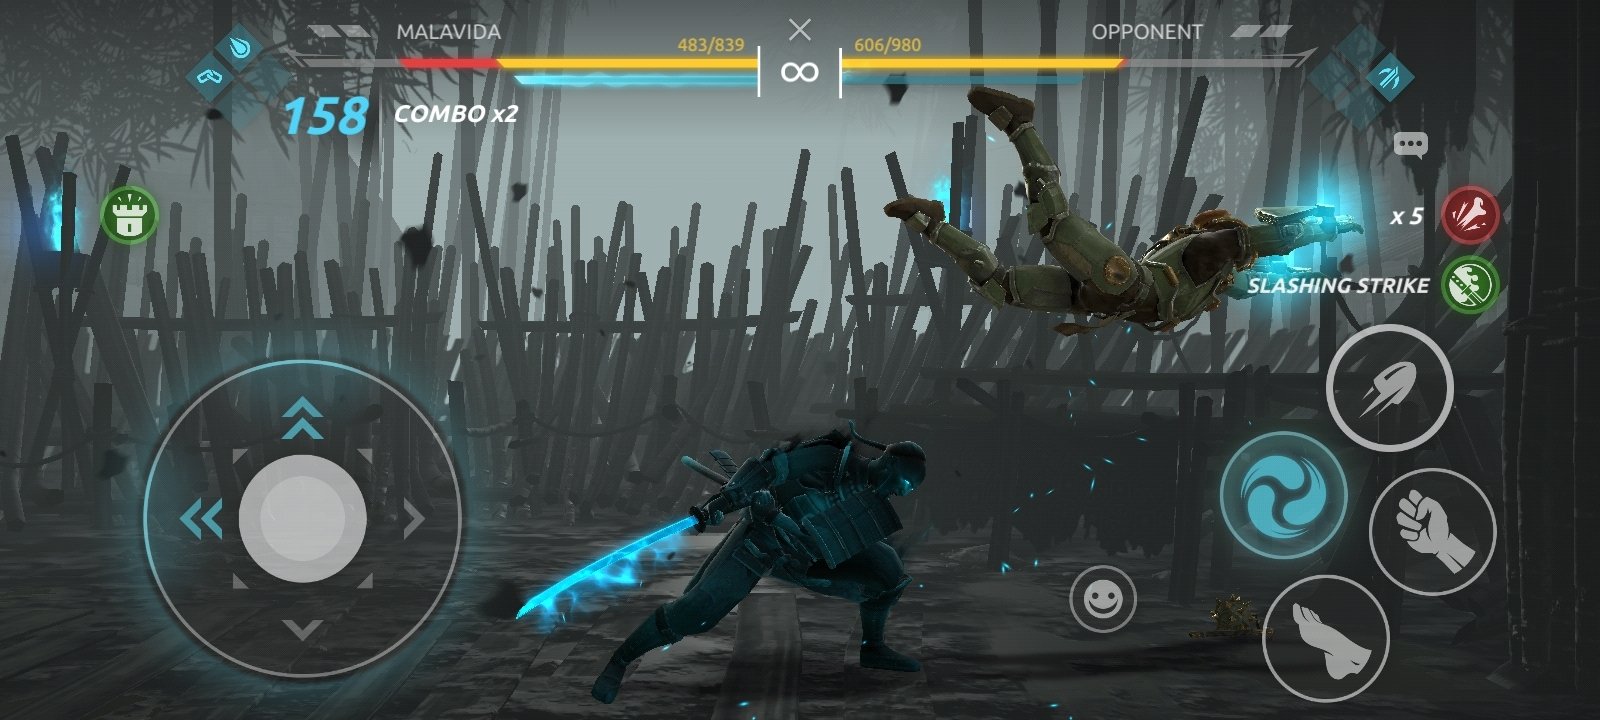 download shadow fight arena obb file download